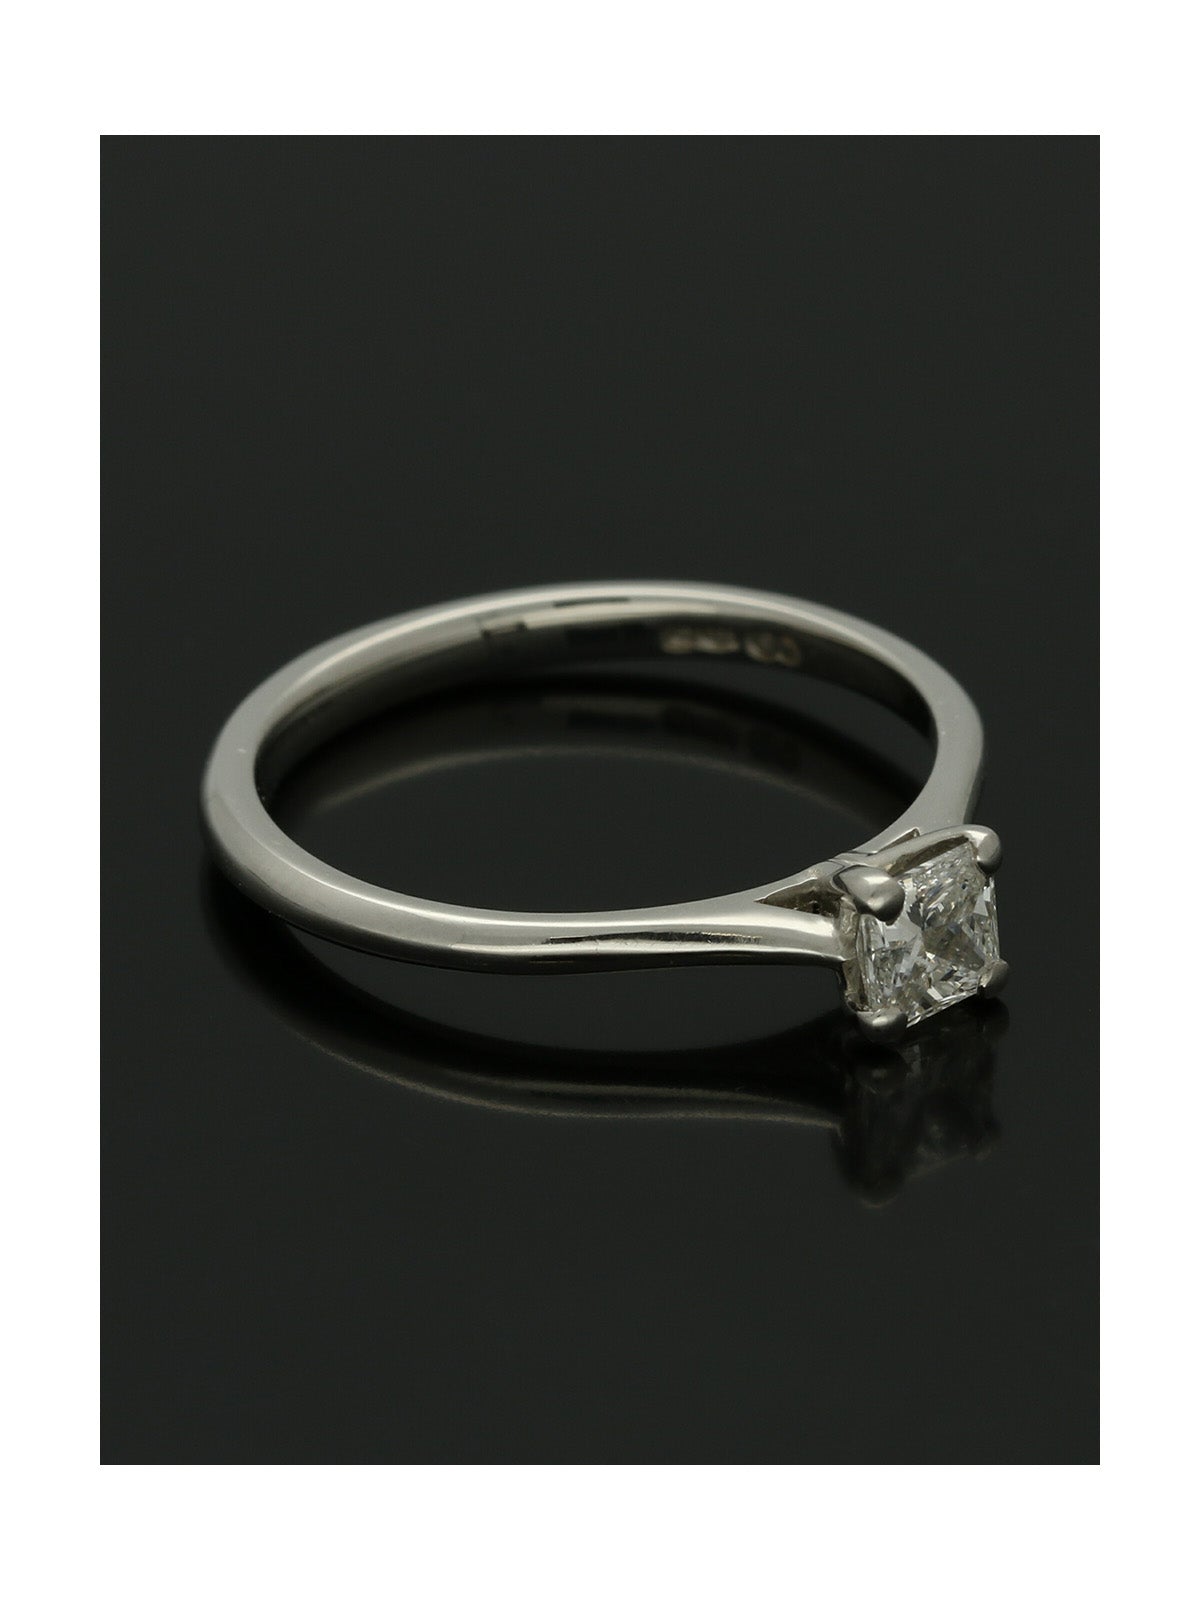 Diamond Solitaire Engagement Ring "The Grace Collection" 0.40ct Princess Cut in Platinum